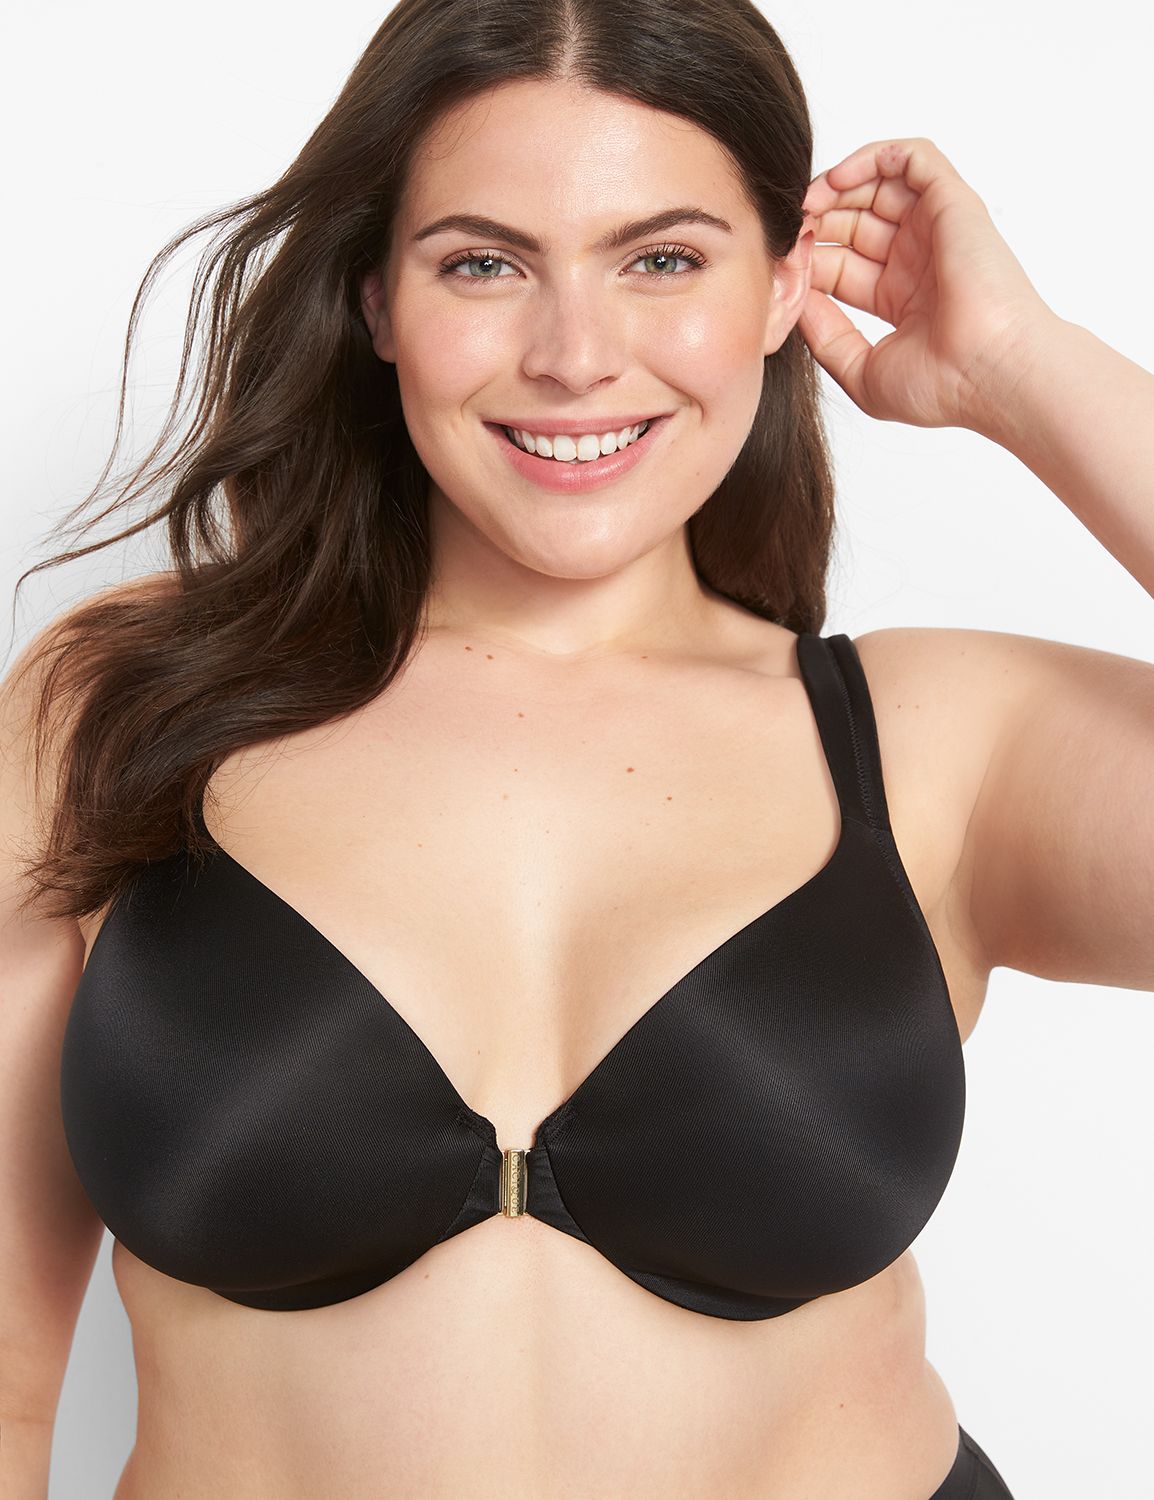 👑 Bras $29.50 👑 Fit for a queen. - Lane Bryant Email Archive